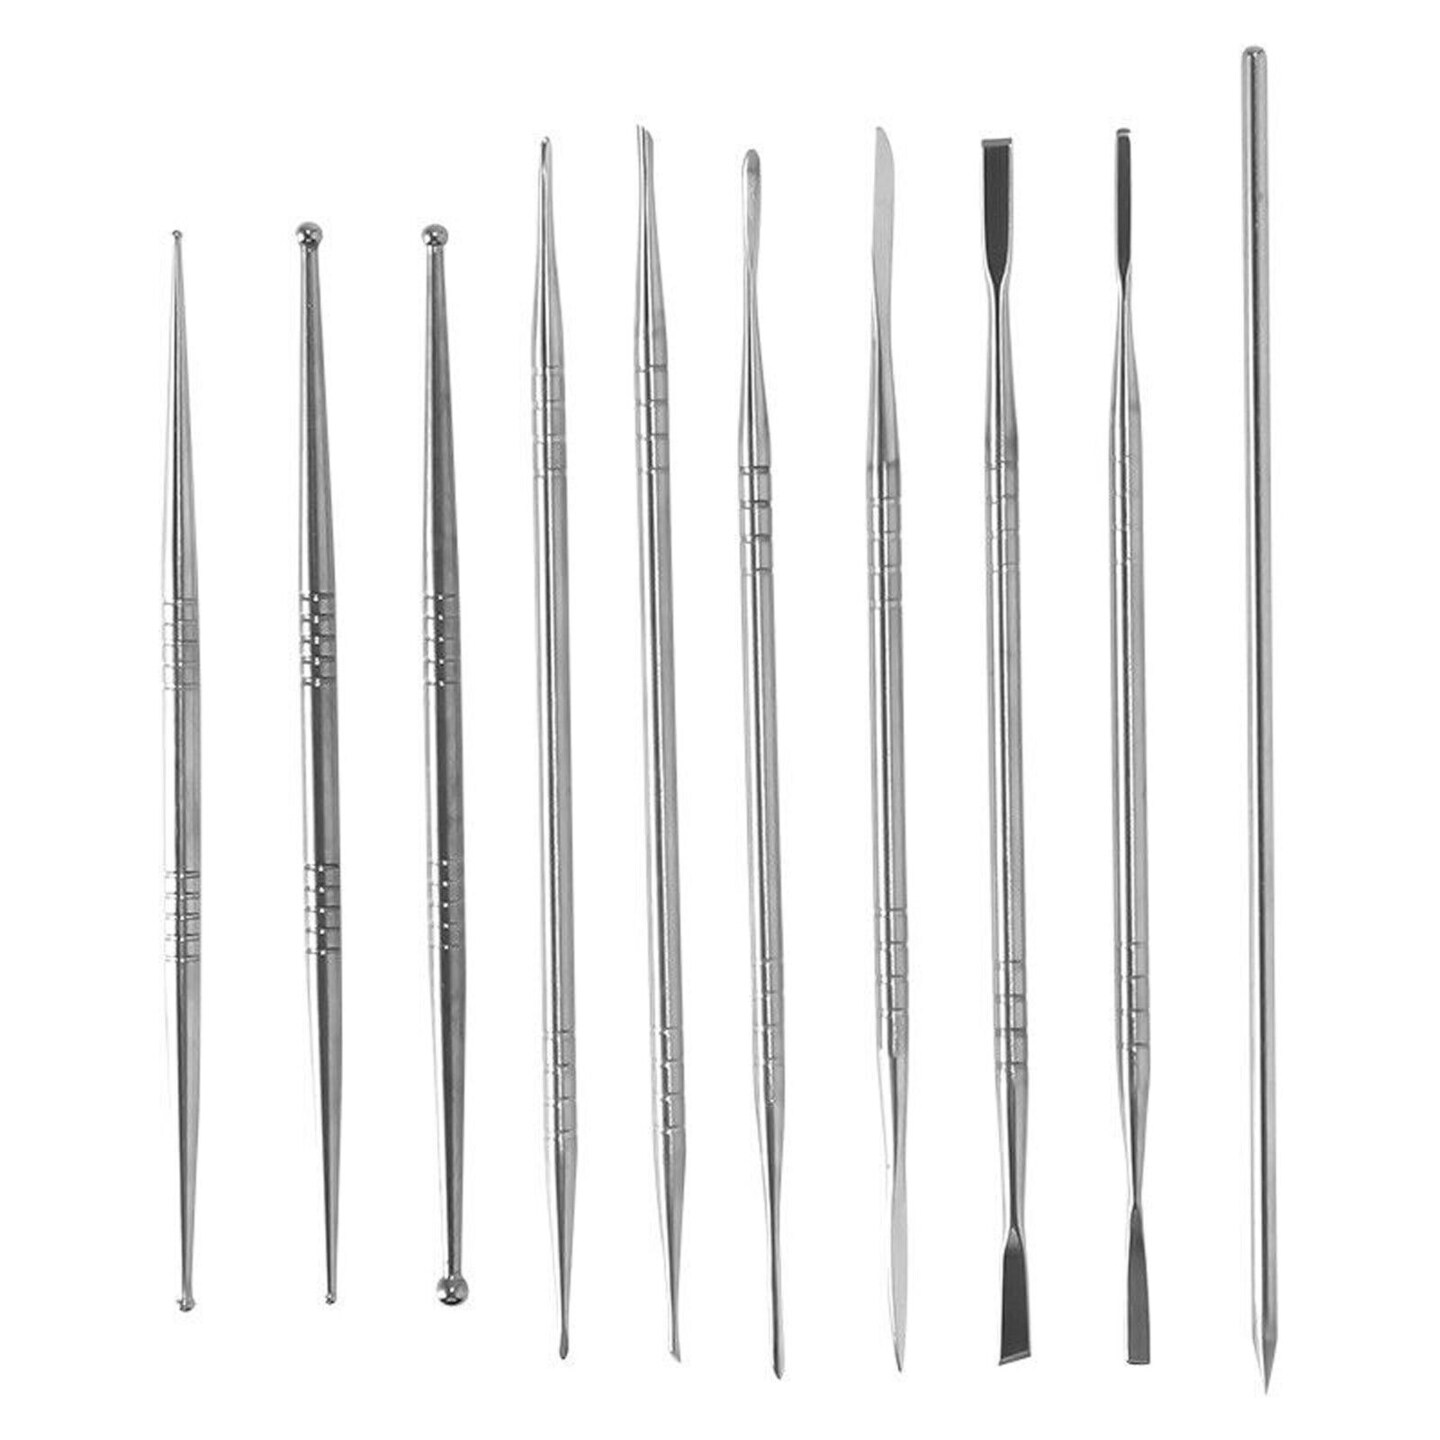 Kitcheniva Stainless Steel Clay Sculpting Set Wax Carving Tool 10 Pcs